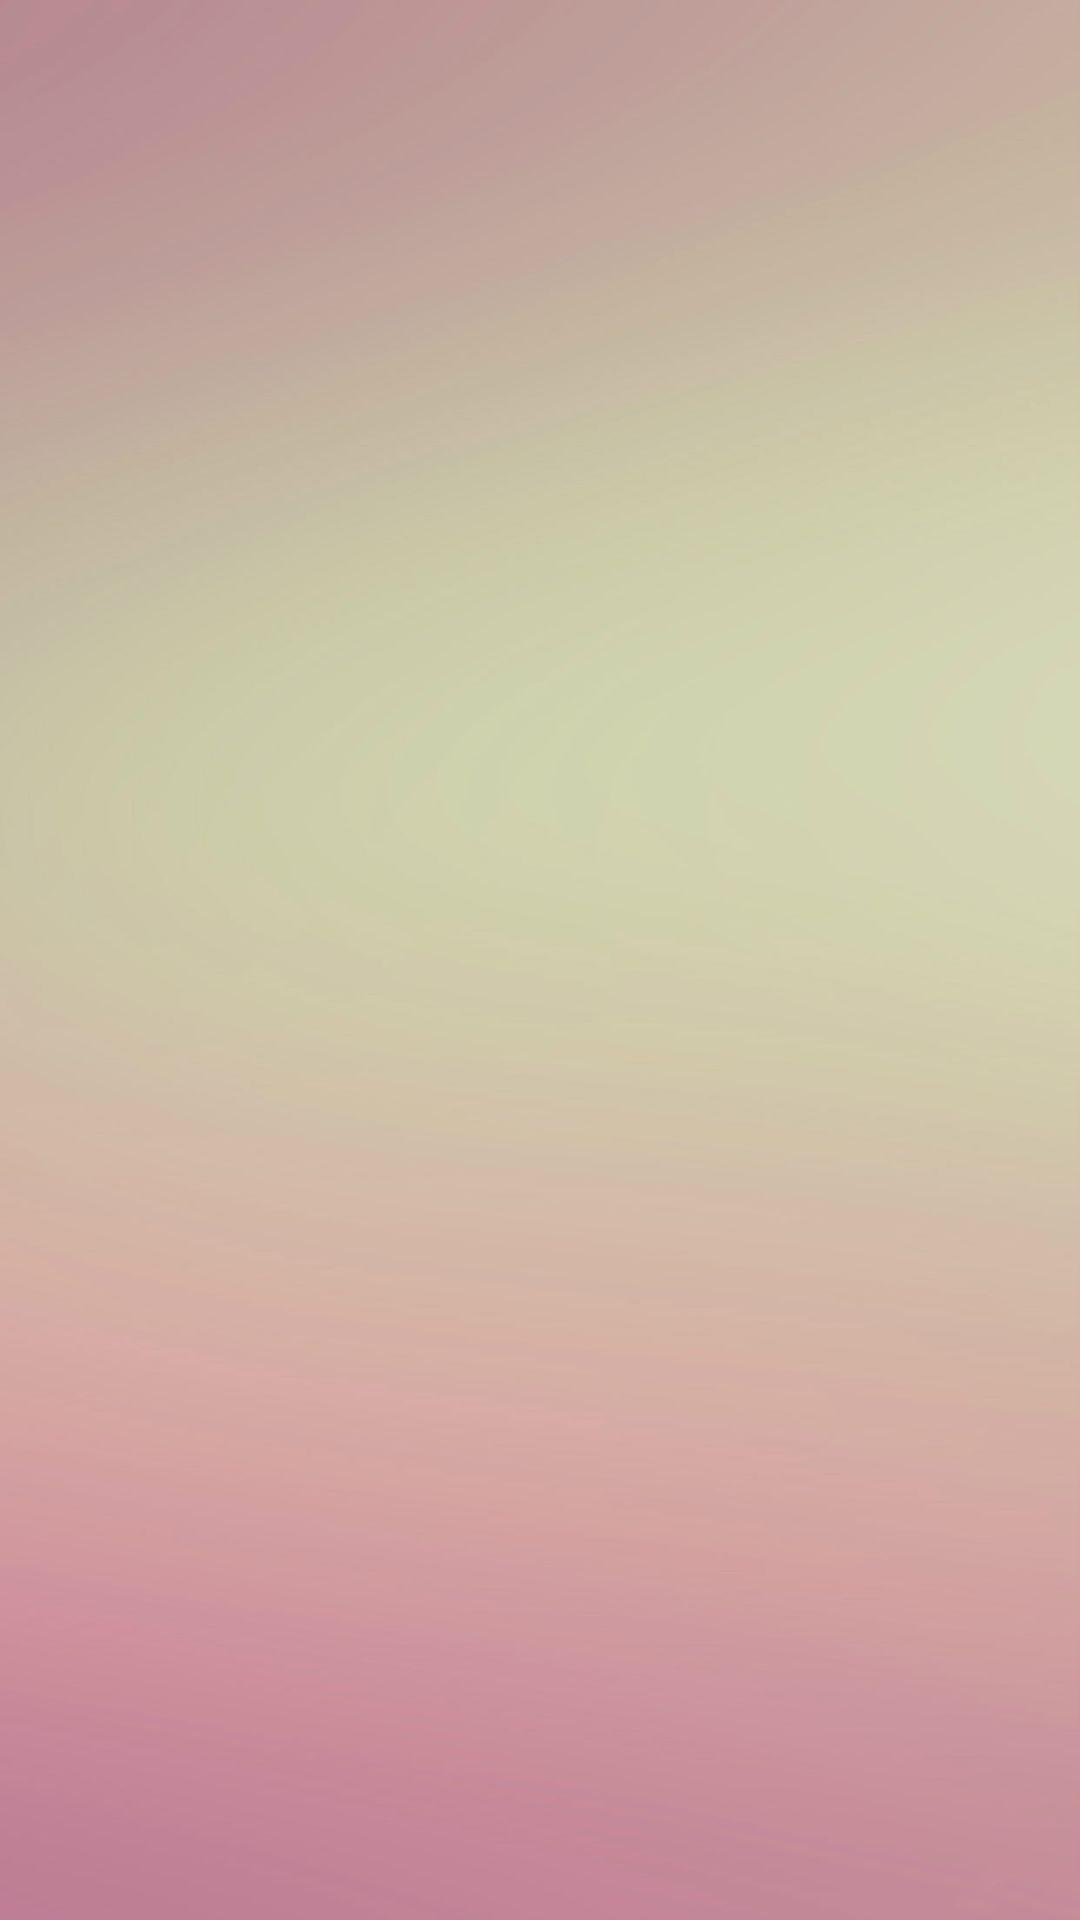 Abstract Pink Gradation Blur Background iPhone 6 wallpaper. Phone